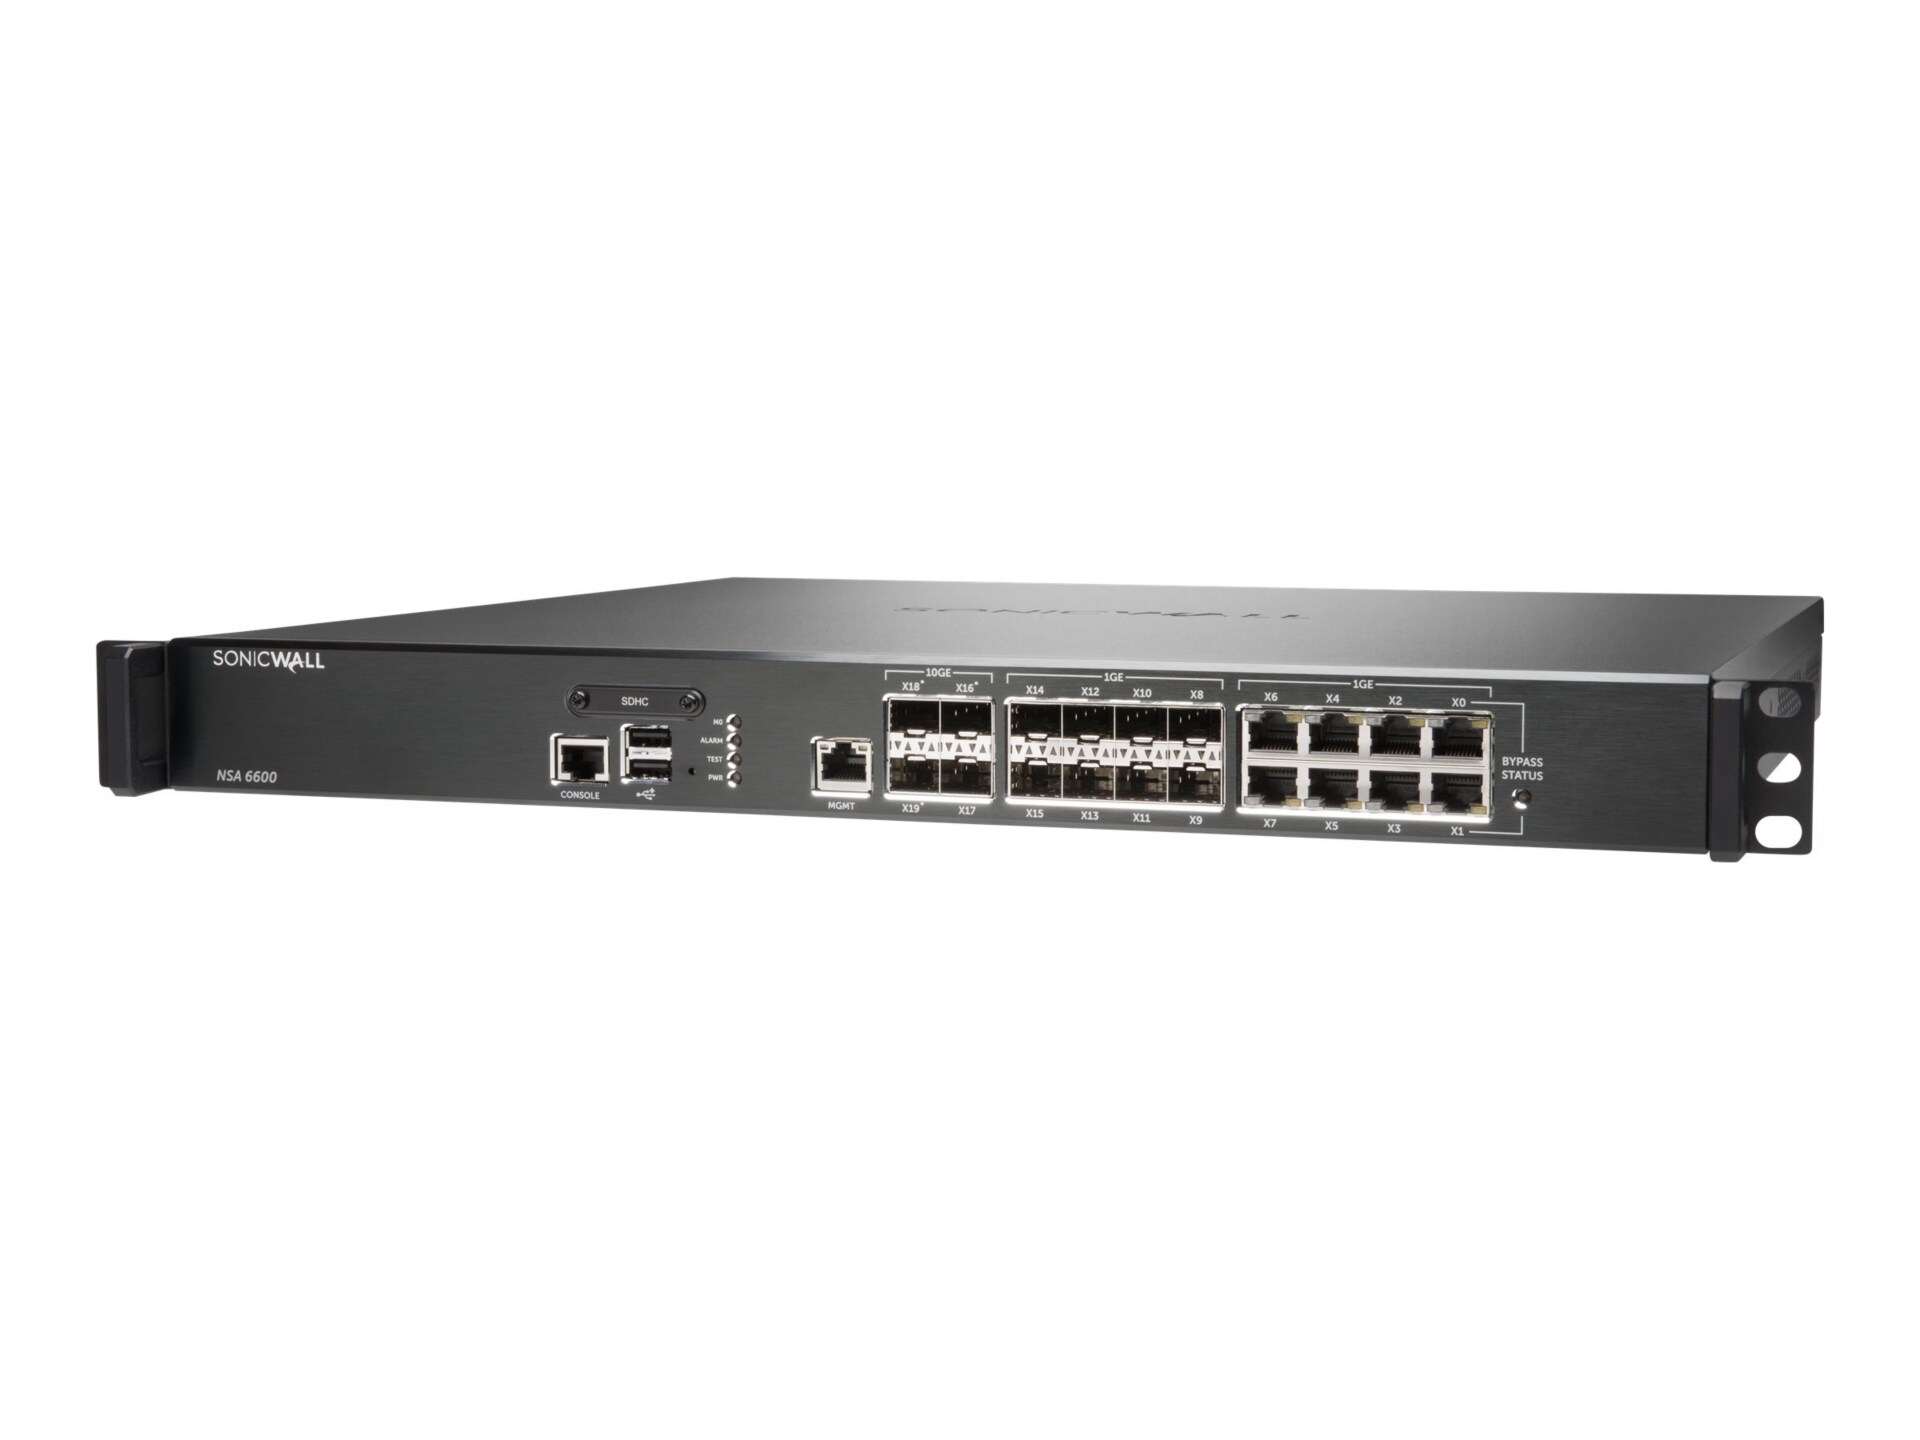 SonicWall NSa 6600 - security appliance